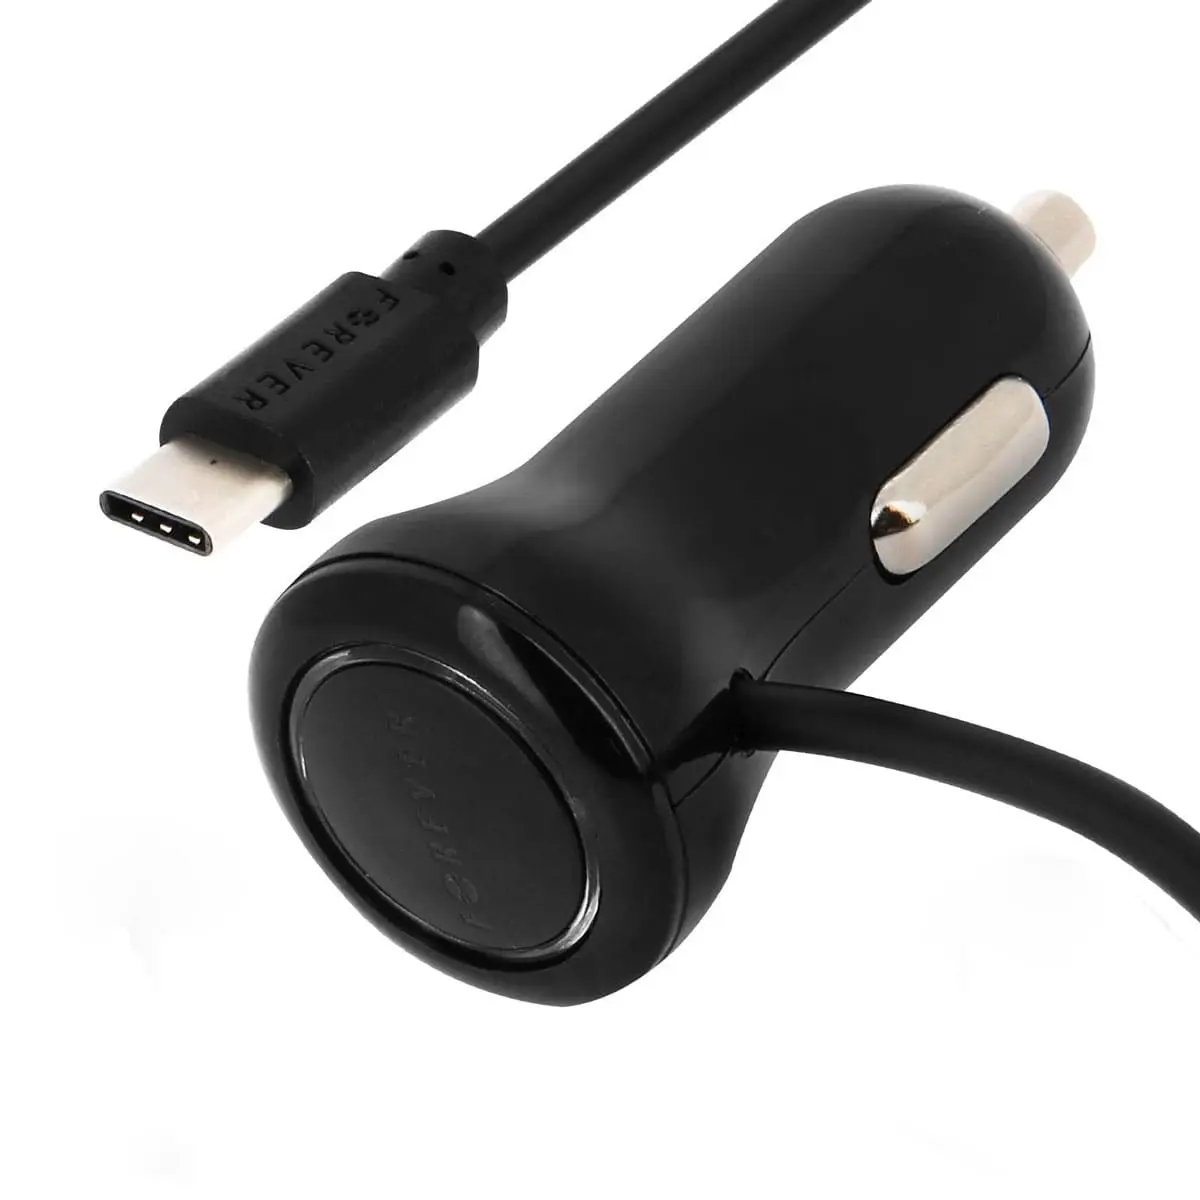 Chargeur Allume Cigare USB C, Sctazagre Chargeur Voiture Cigare